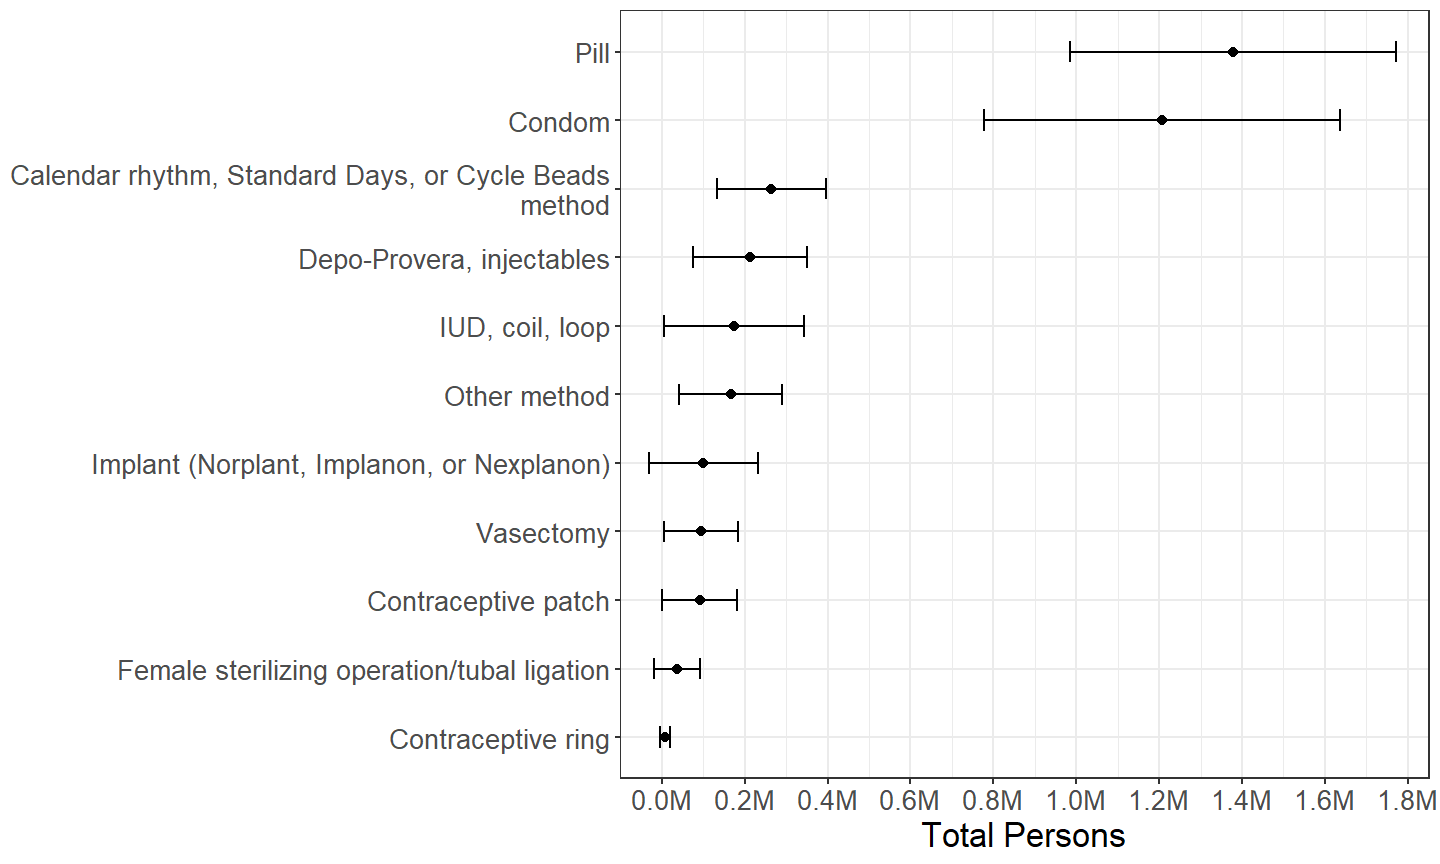 Males by other contraceptive method(s) used during last intercourse, among those who used withdrawal during last intercourse with a female in the past 3 months.